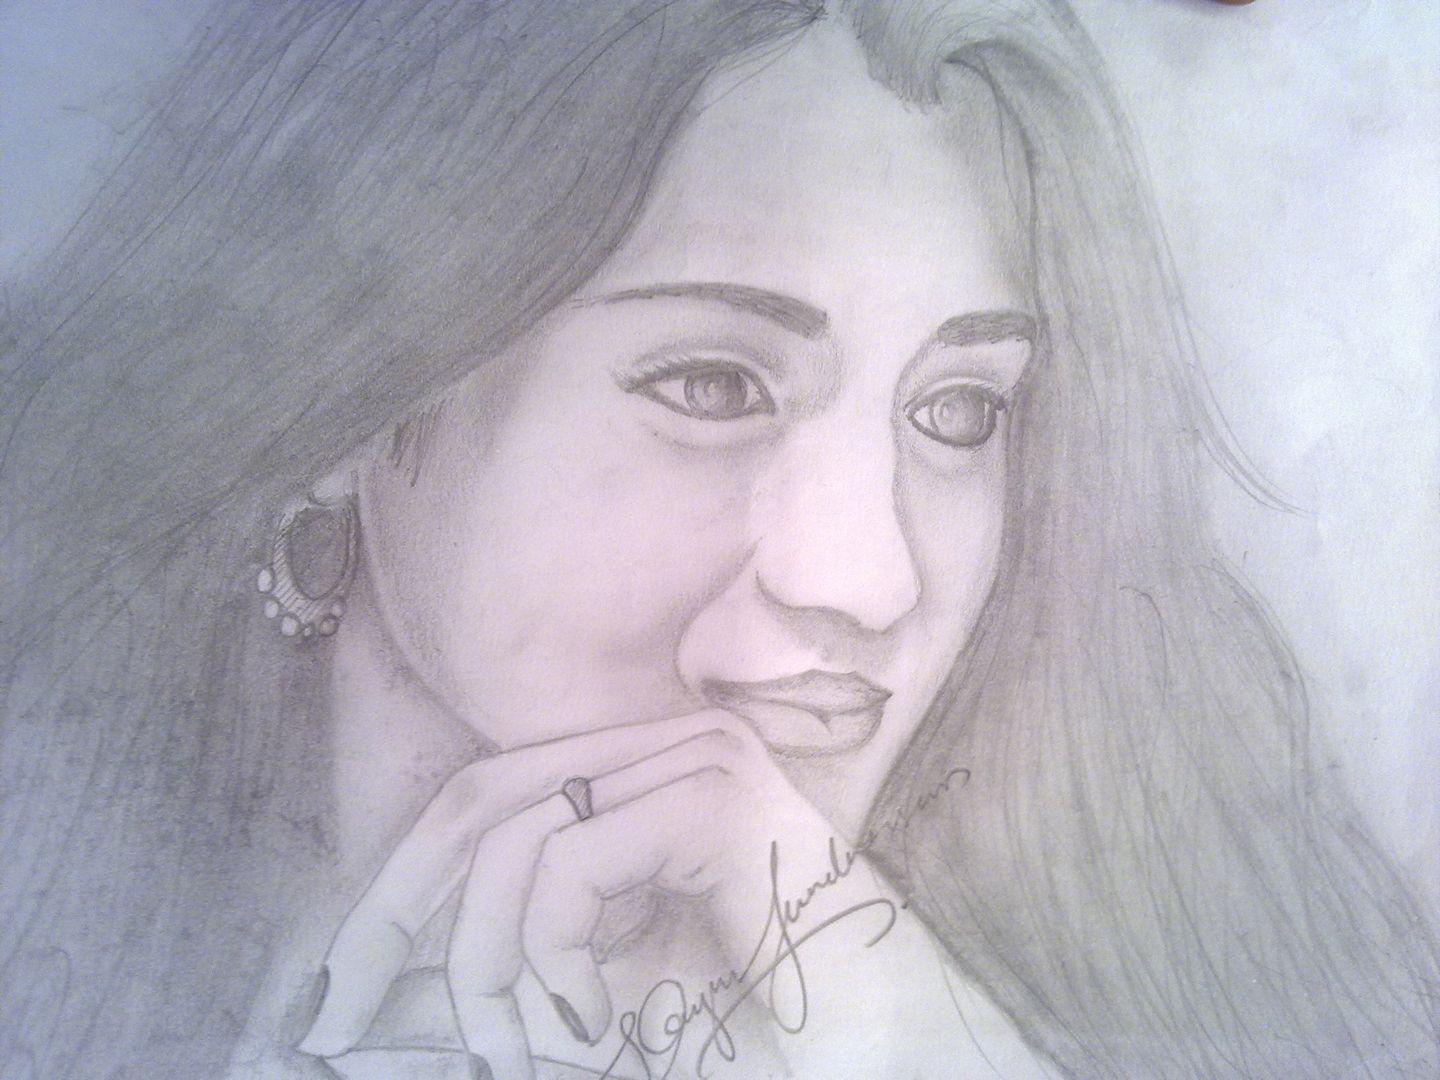 Superb Sketches Of Tollywood Celebrities